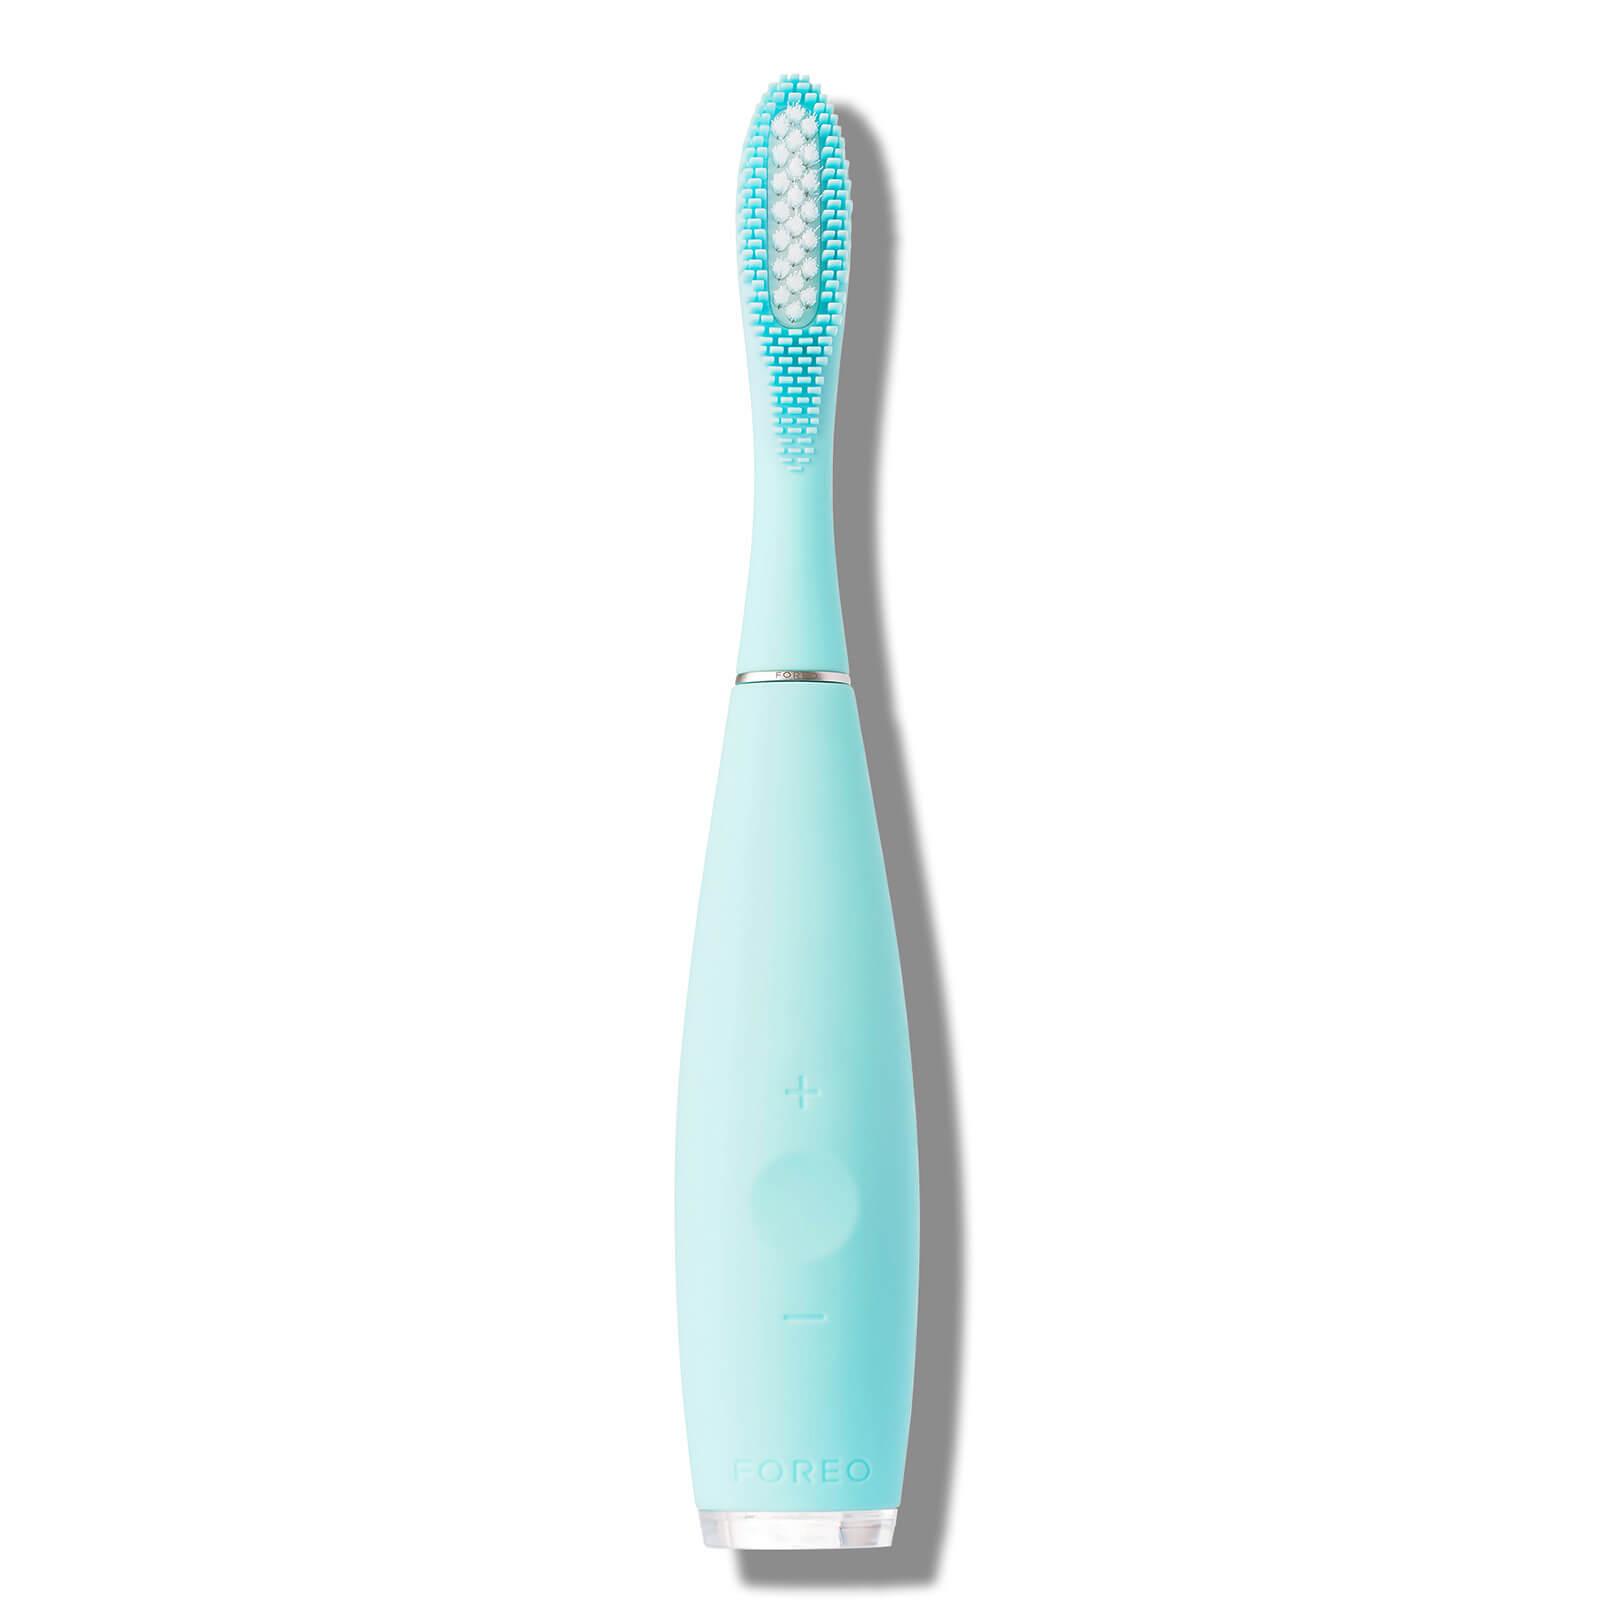 FOREO ISSA 2 Electric Sonic Toothbrush (Various Shades) - Mint